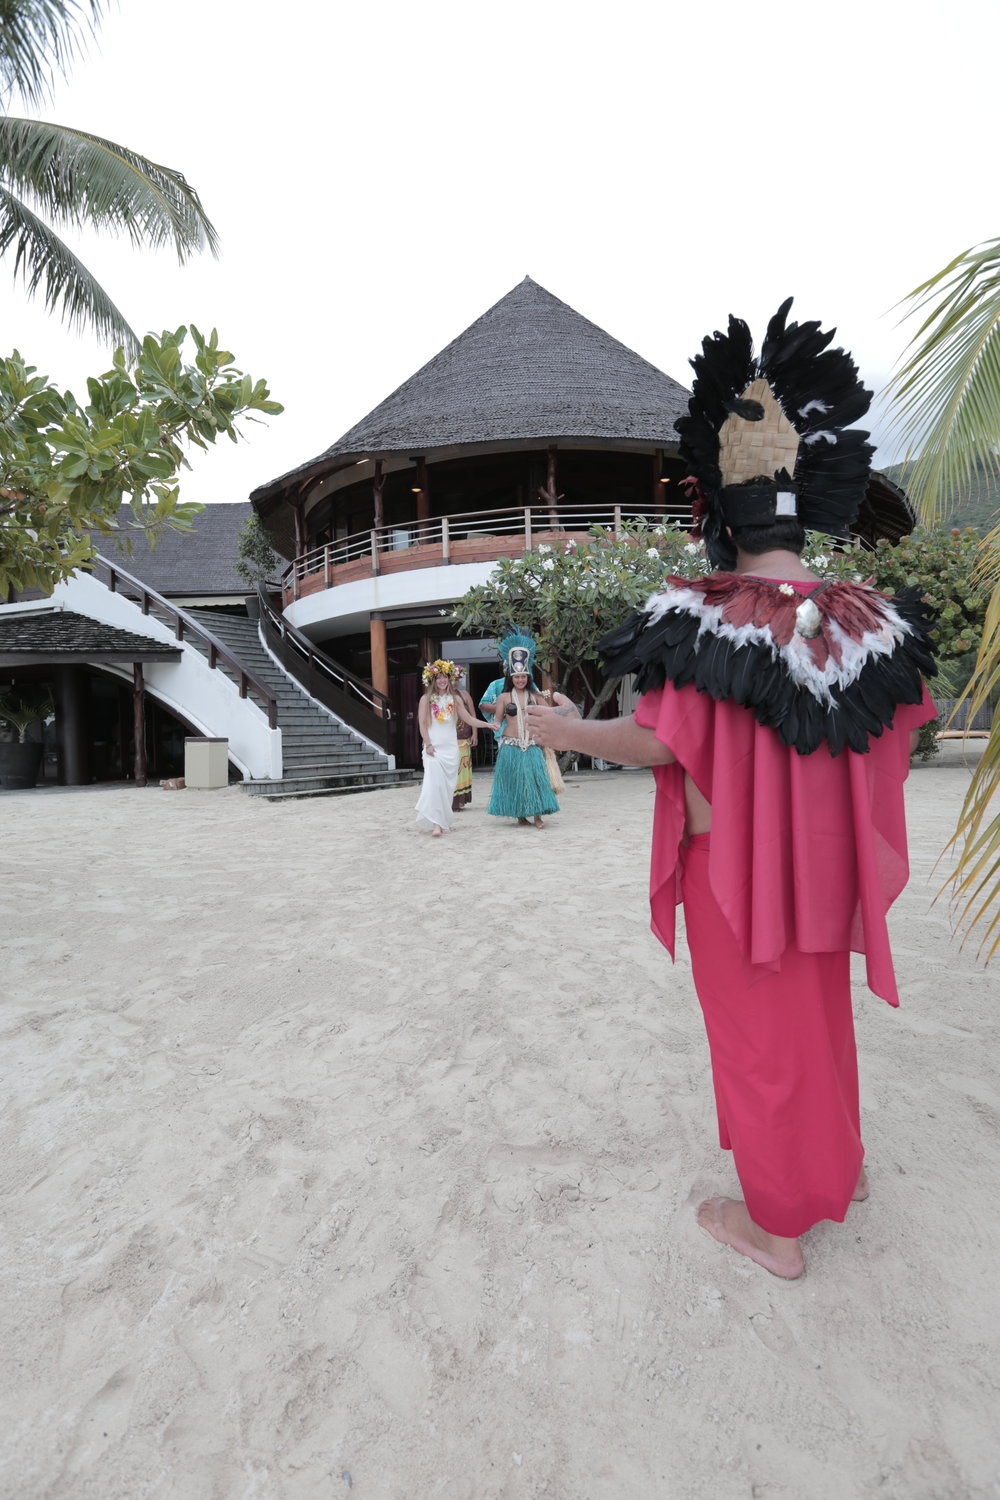 The Tahitian priest welcomes me to the beach.